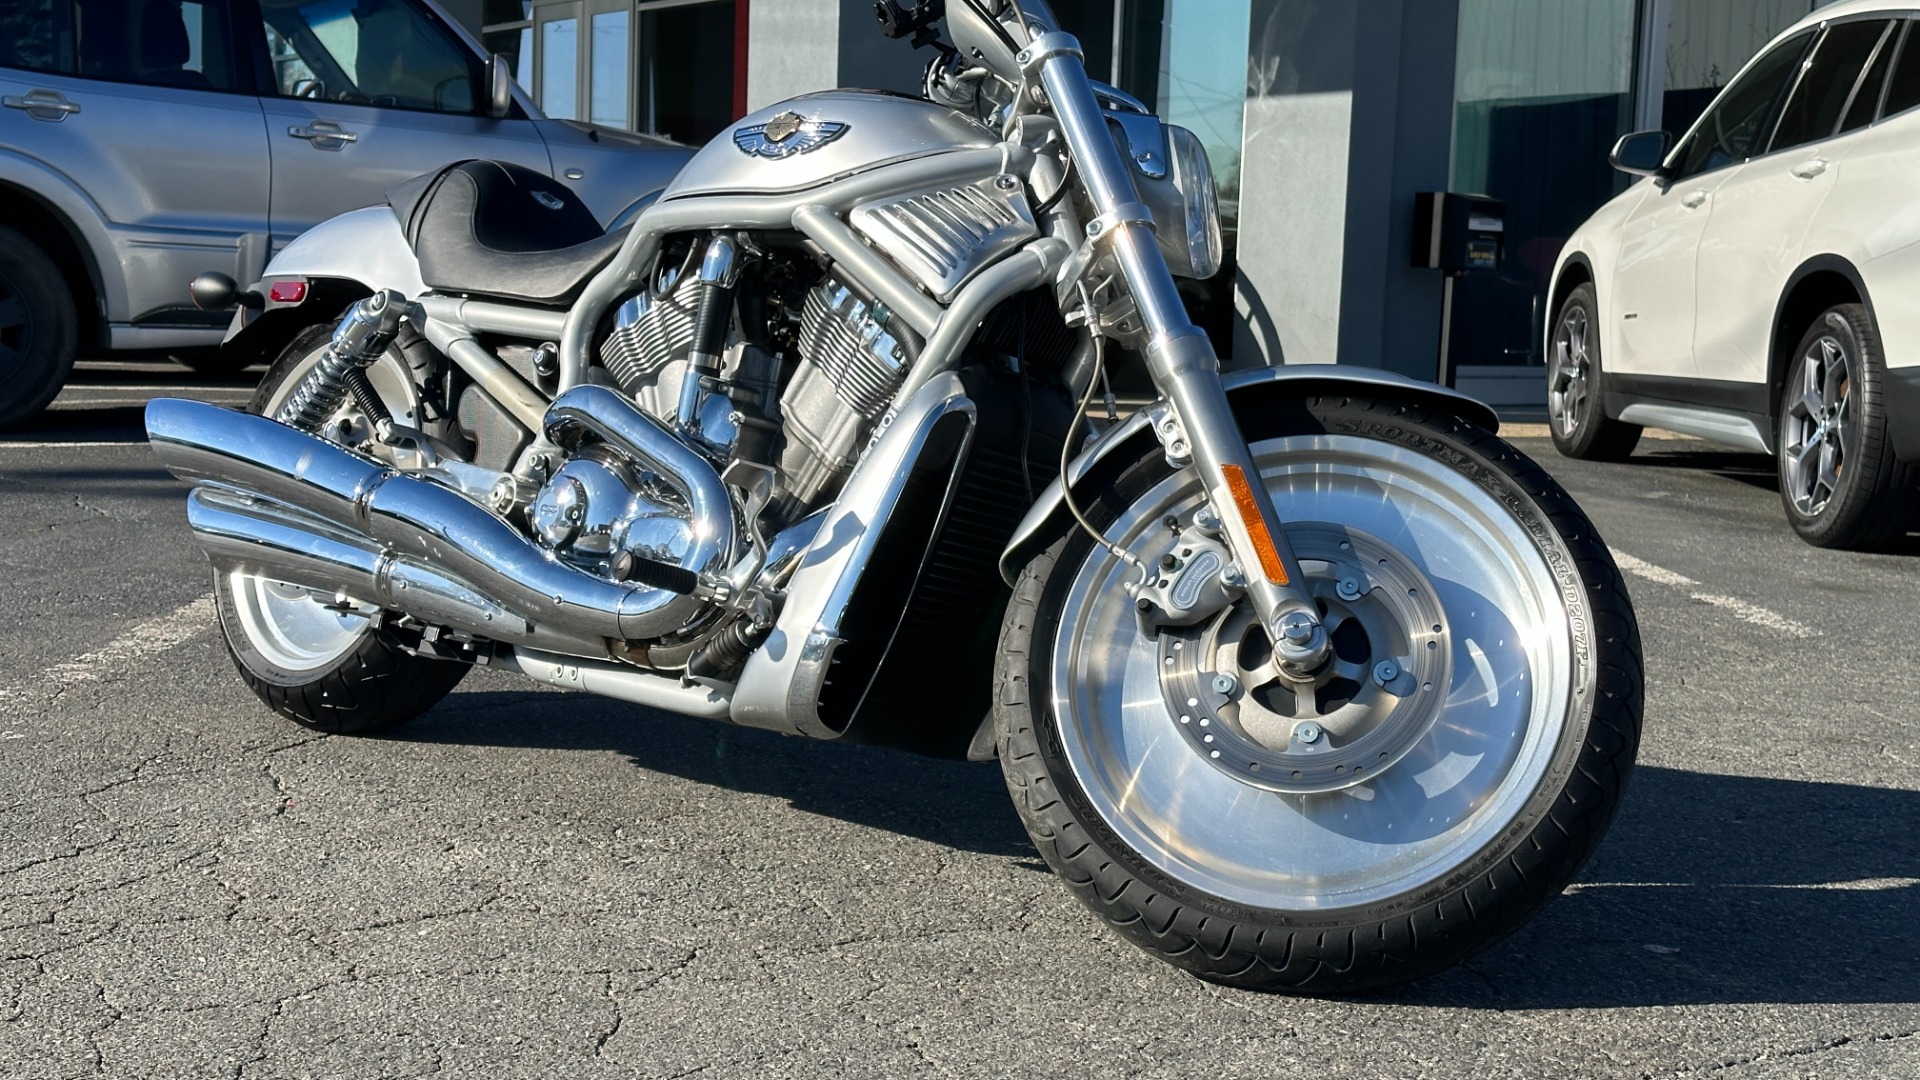 Used 2003 Harley Davidson V Rod ANNIVERSARY EDITION / 1130CC ENGINE / BREMBO BRAKES / VORTEX AIR SCOOPS for sale $7,995 at Formula Imports in Charlotte NC 28227 4